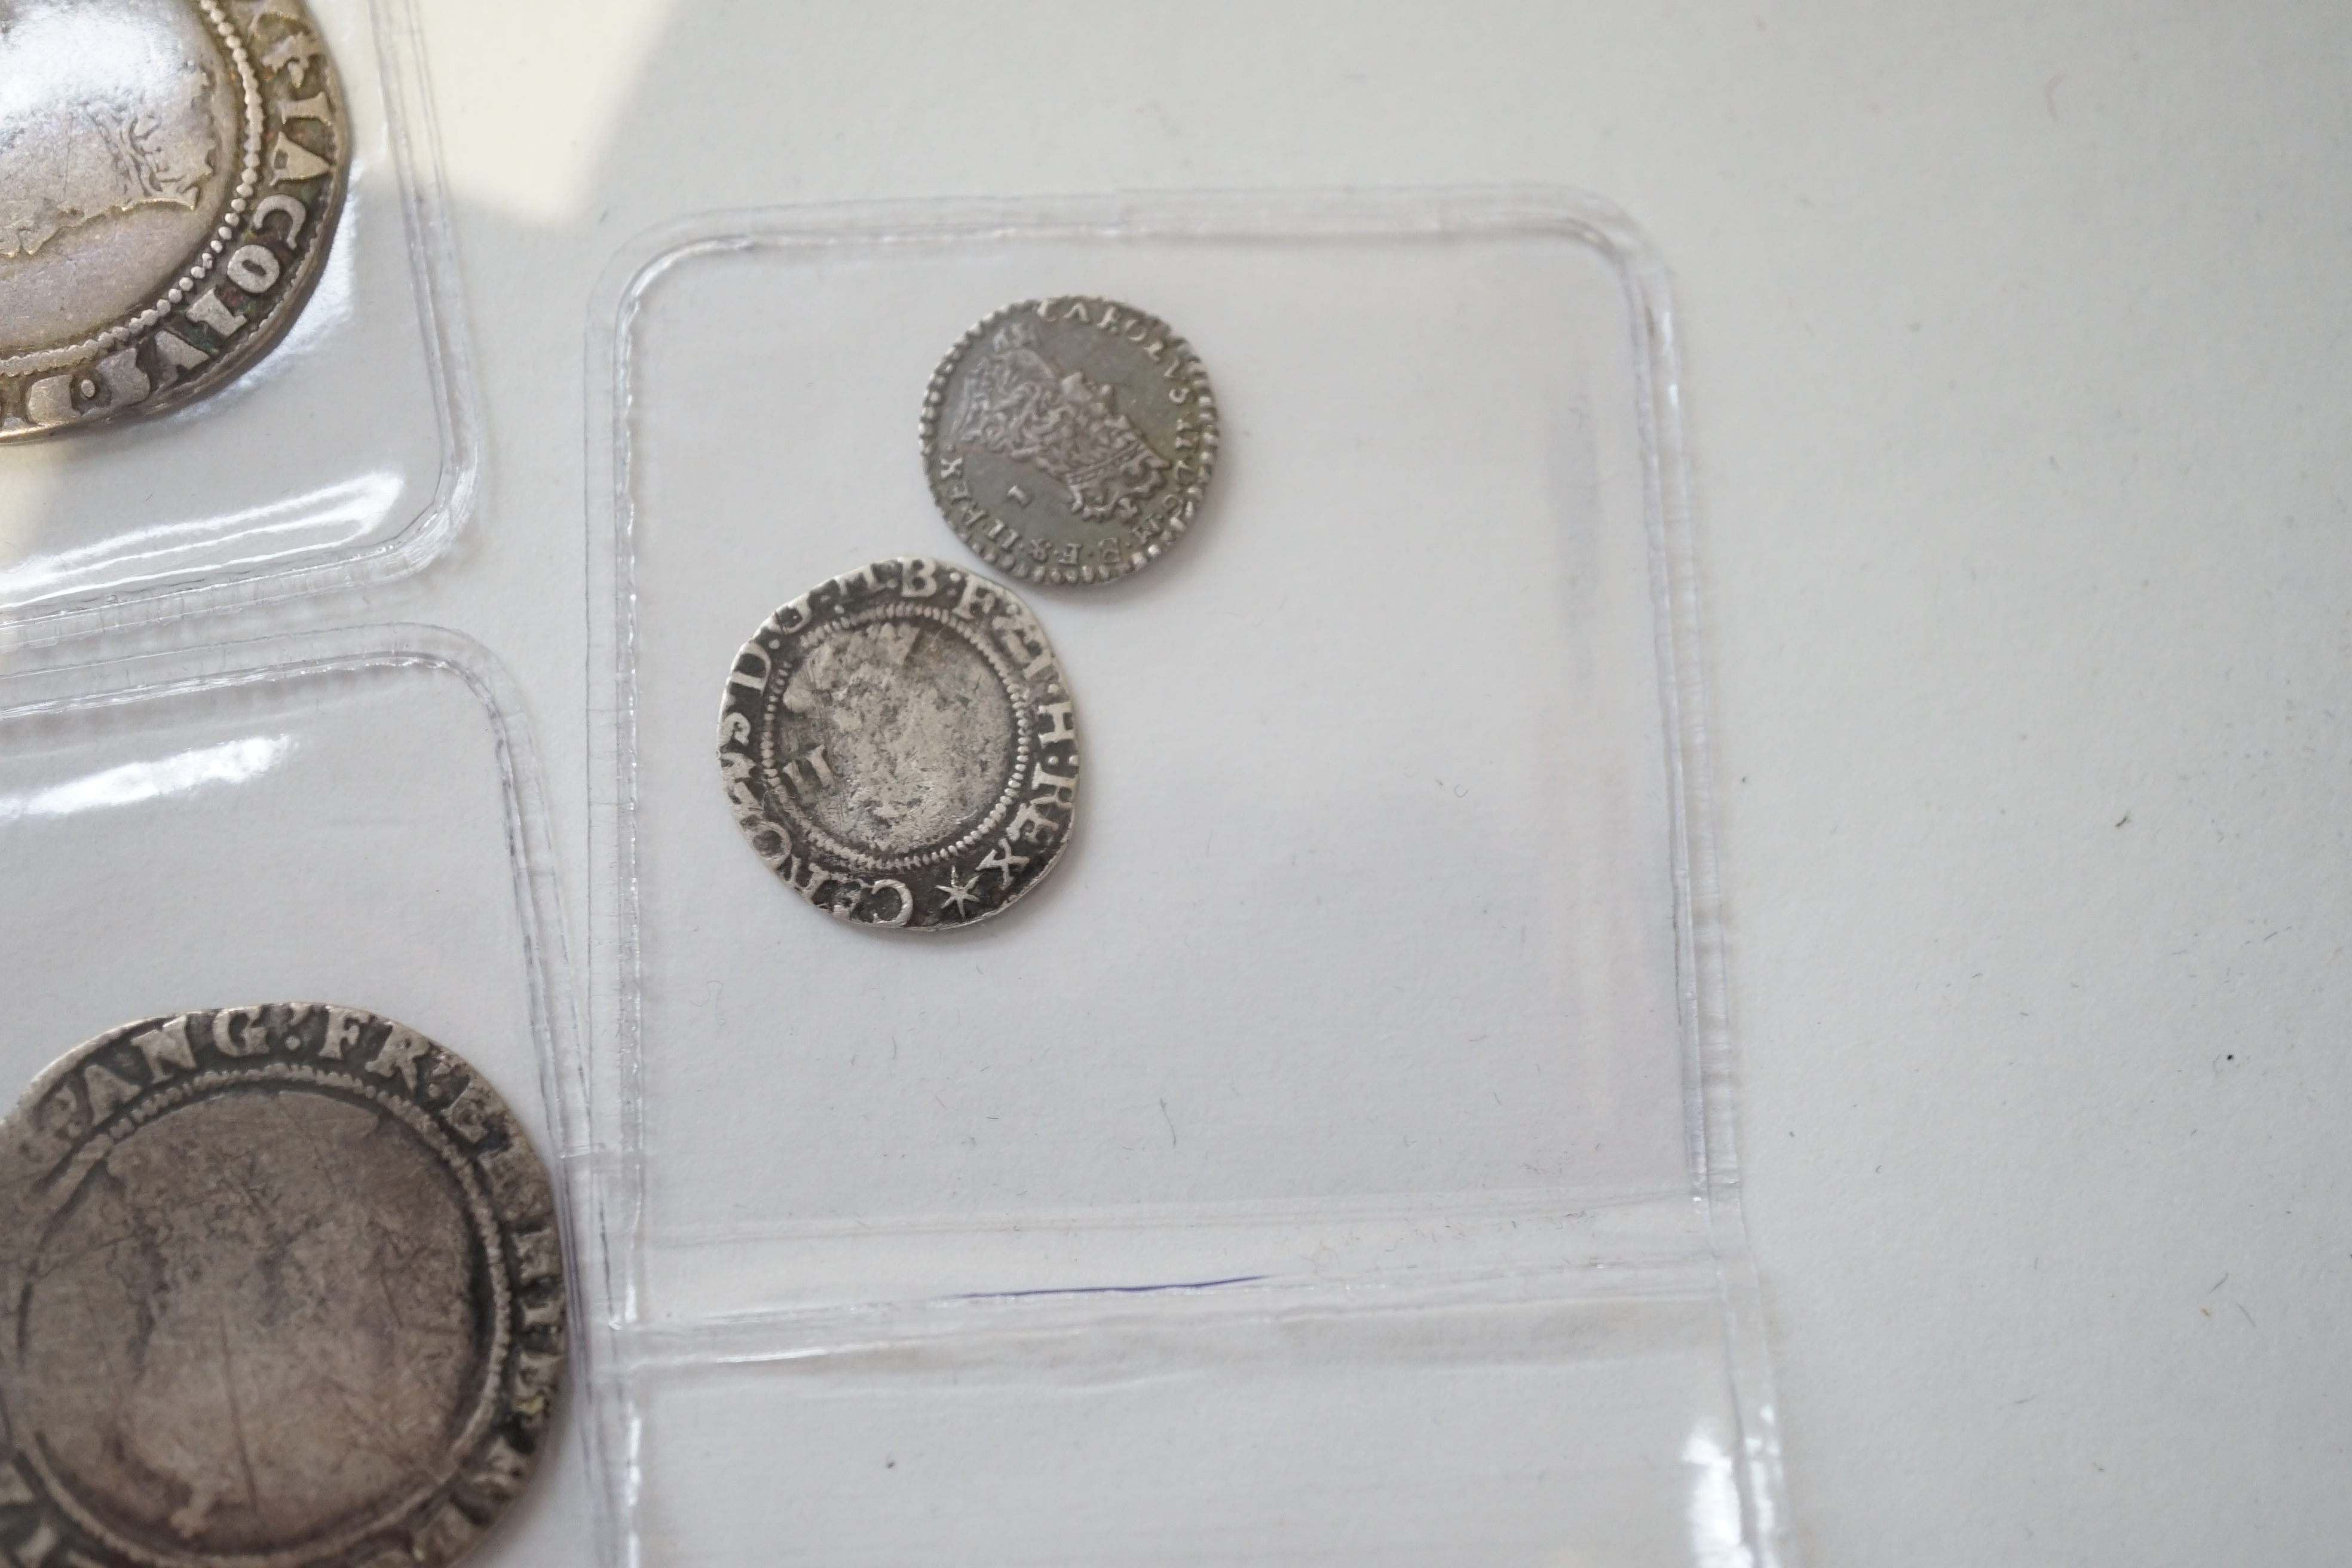 British Tudor and Stuart hammered silver coins, an Elizabeth I shilling and two sixpences, a James I sixpence, two Charles I shillings, a Charles II penny, first issue, 1660-62, (S3311) VF, twopence (S3310) (8)